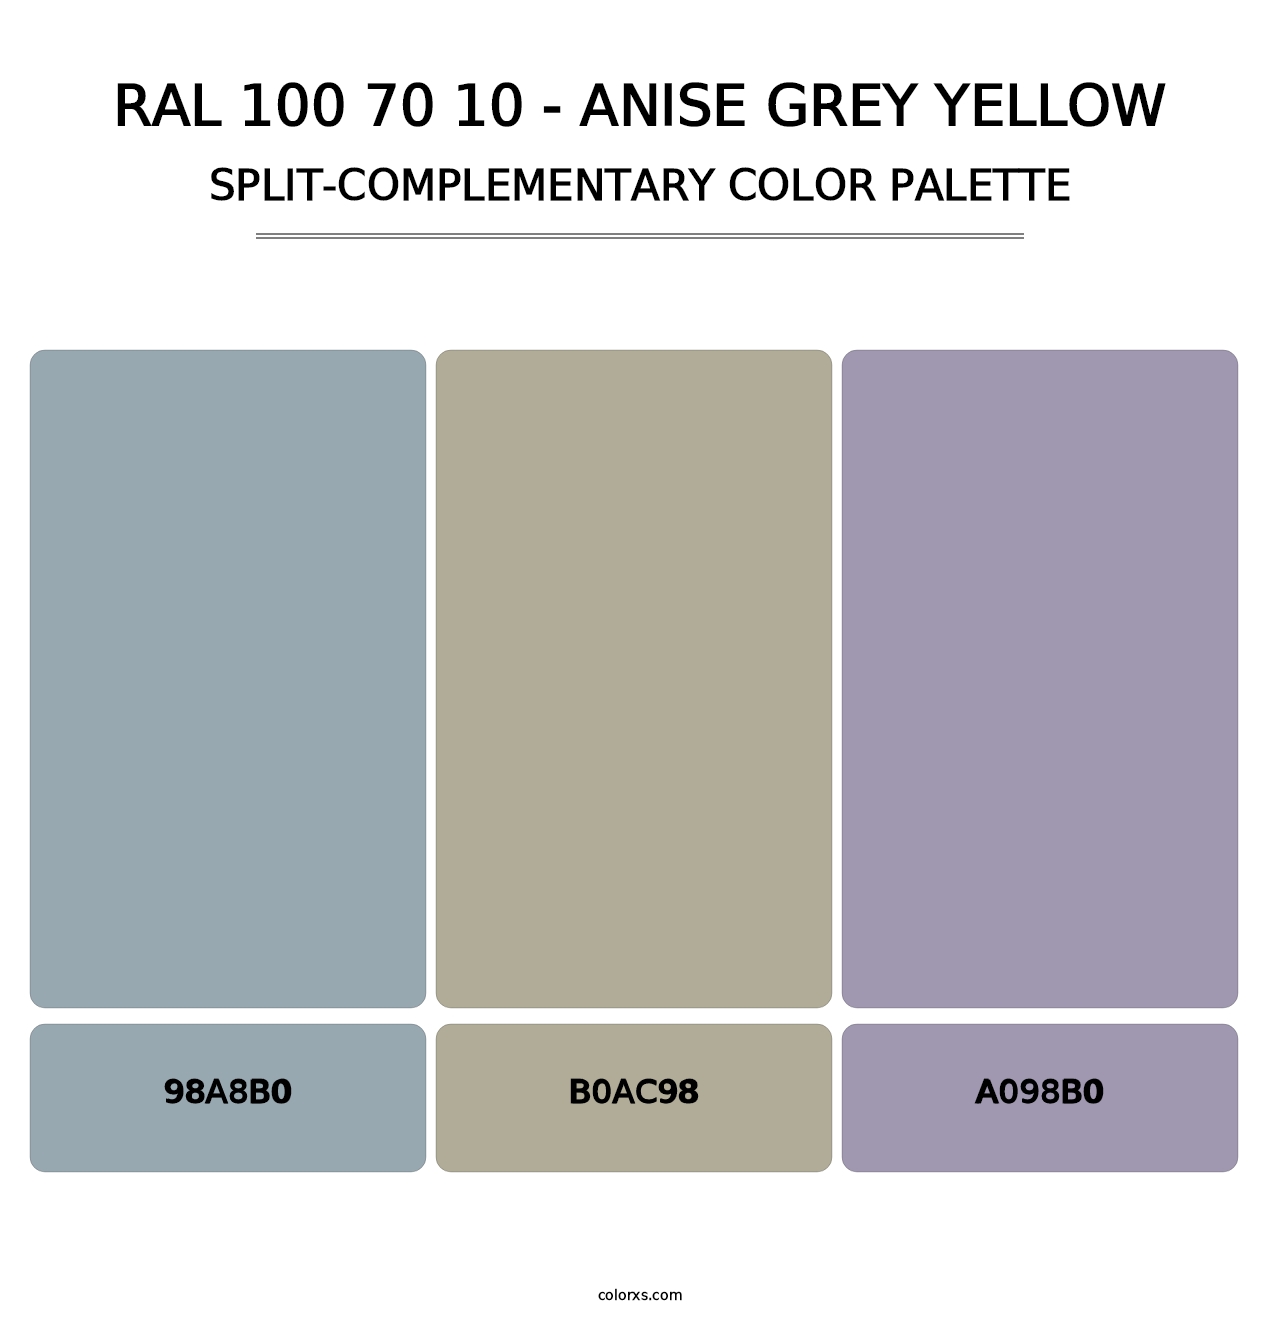 RAL 100 70 10 - Anise Grey Yellow - Split-Complementary Color Palette